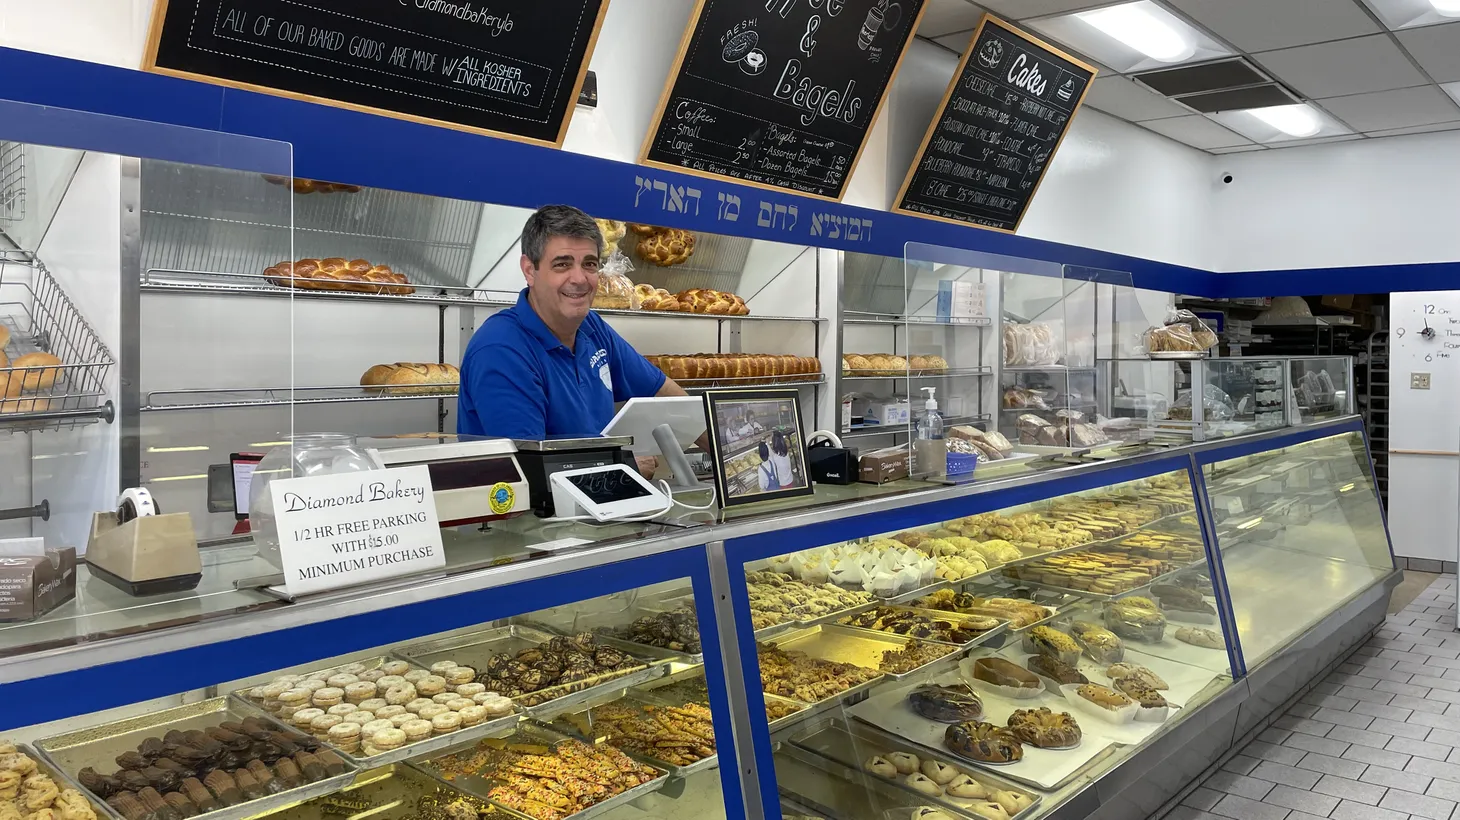 Owner Doug Weinstein stands behind the counter of Diamond Bakery, which was opened by a Jewish Holocaust survivor in 1946.